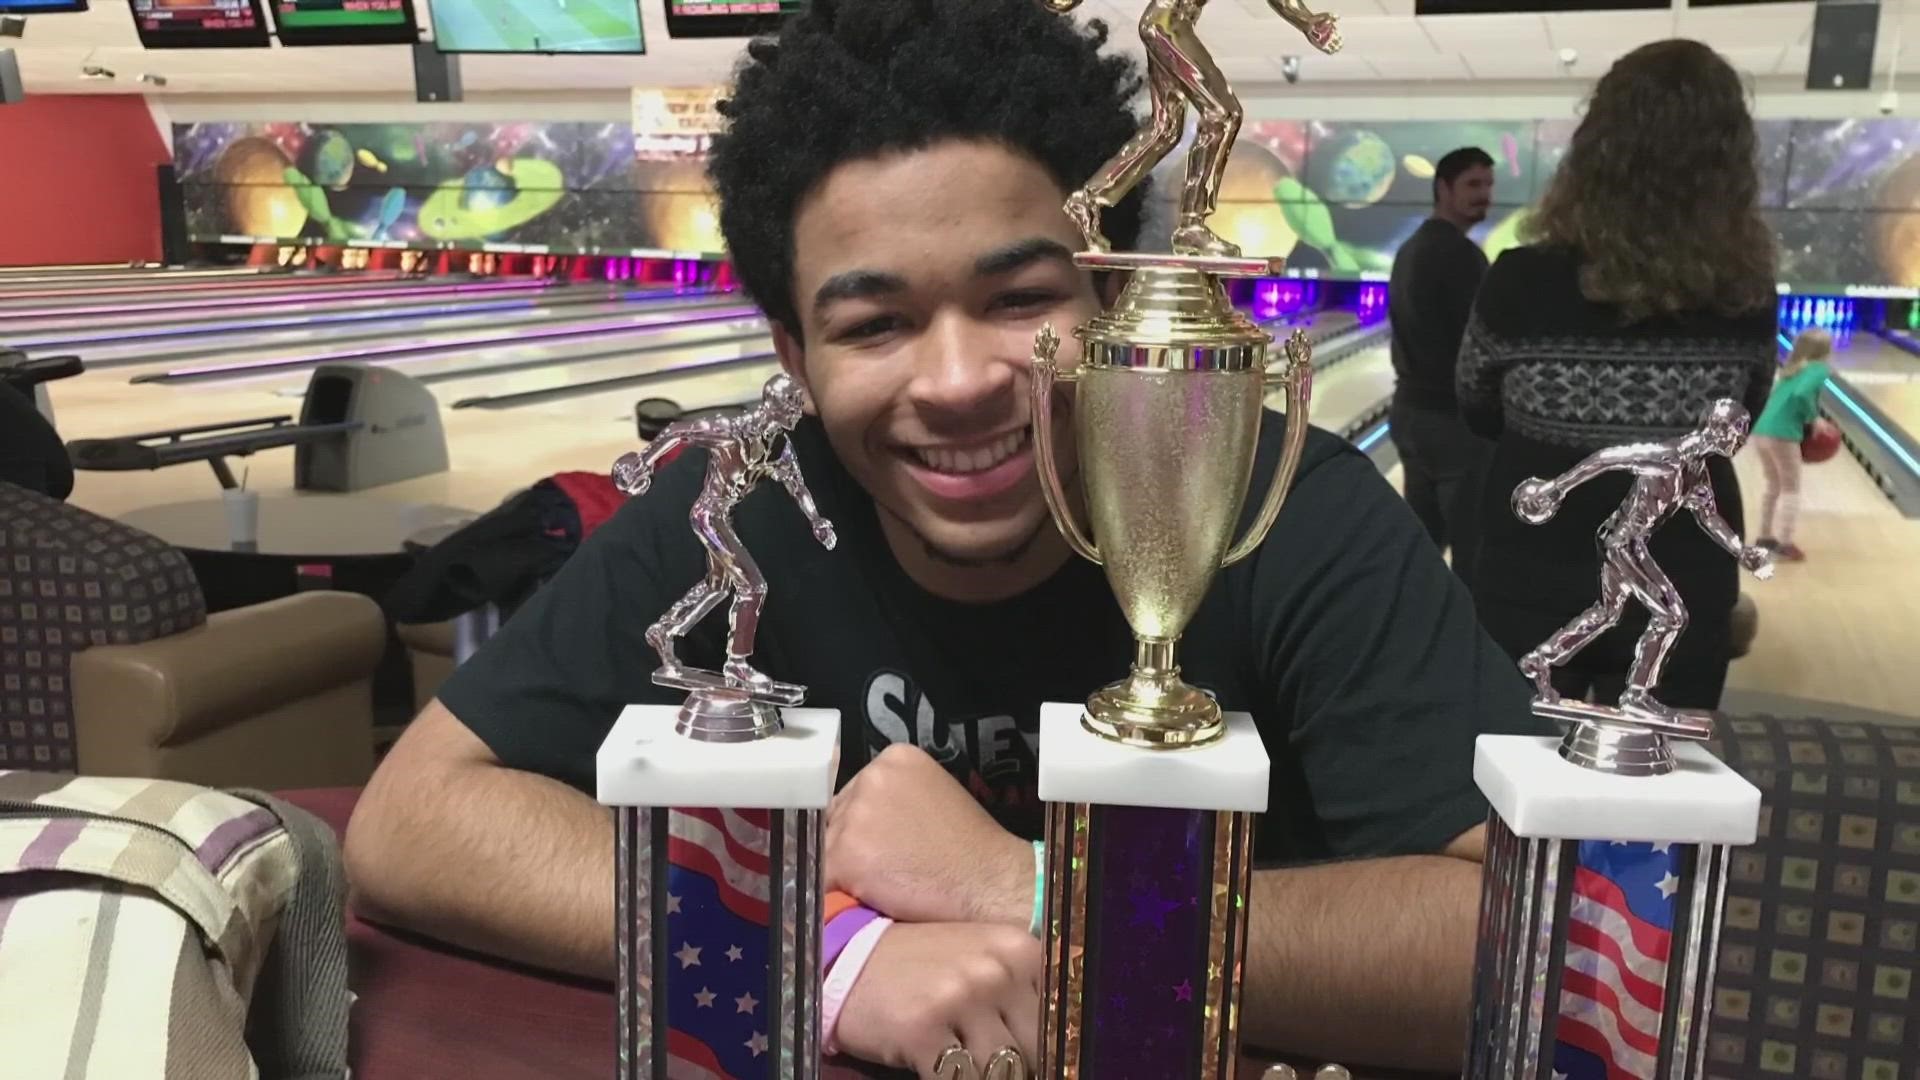 Damon Aubrey, a bowler from Mifflin, recently bowled the first 300 game in the program's history.